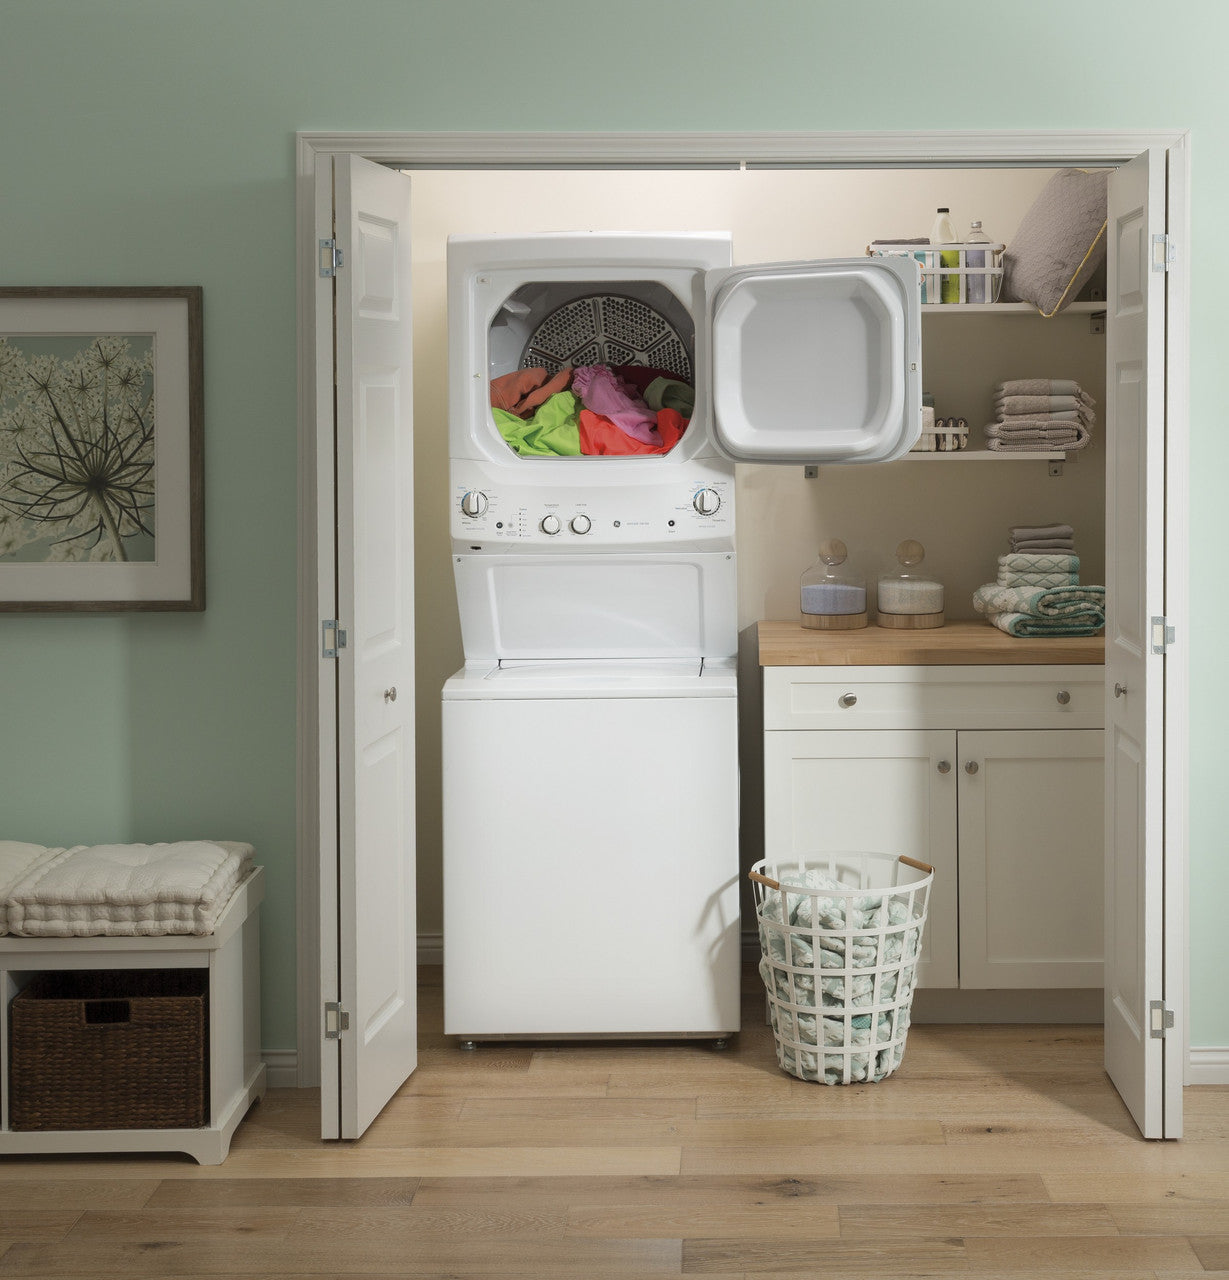 GE - 3.8 cu. Ft. Washer and 5.9 cu. Ft. Dryer Unitized Spacemaker Laundry Stacker - GUD27GSSMWW